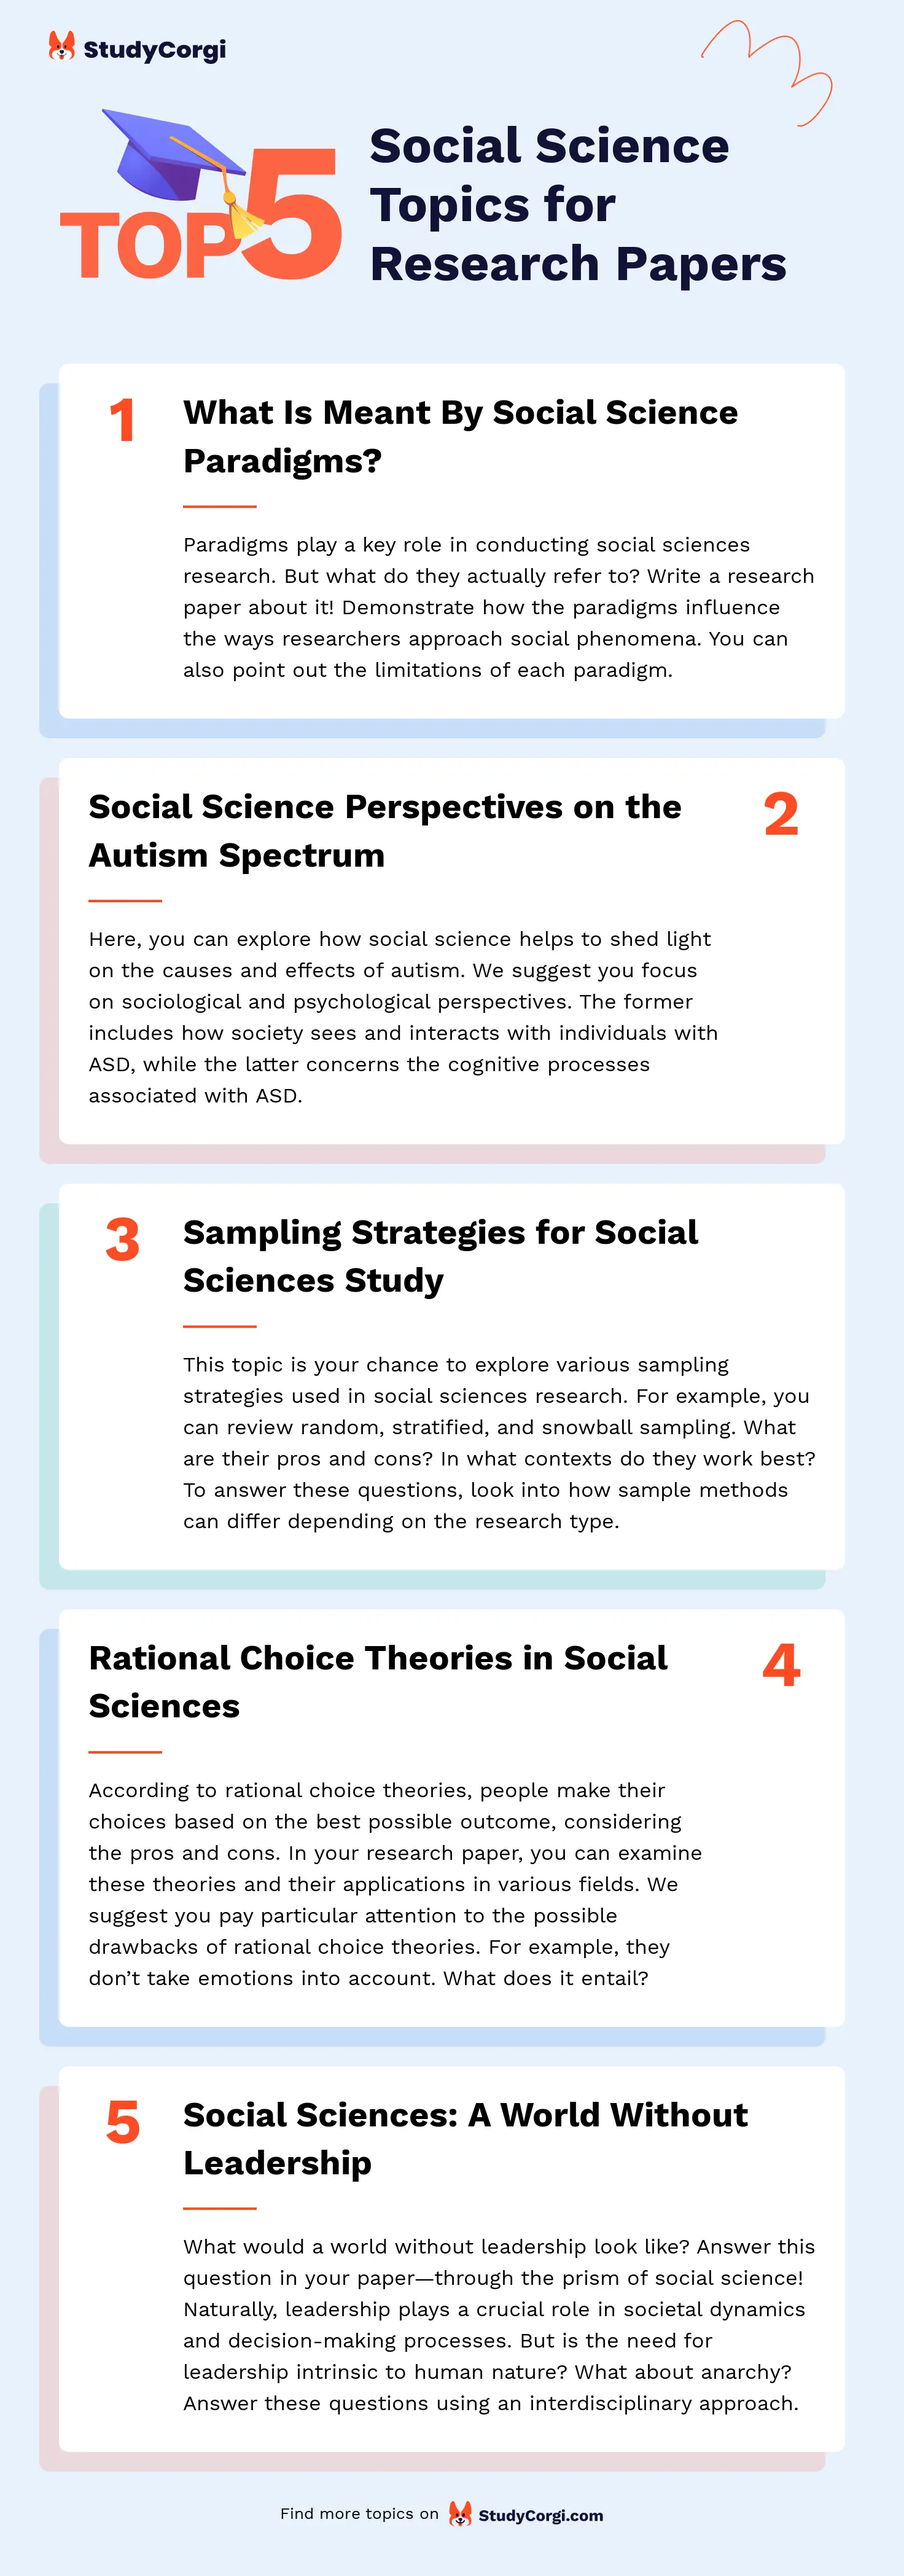 TOP-5 Social Science Topics for Research Papers